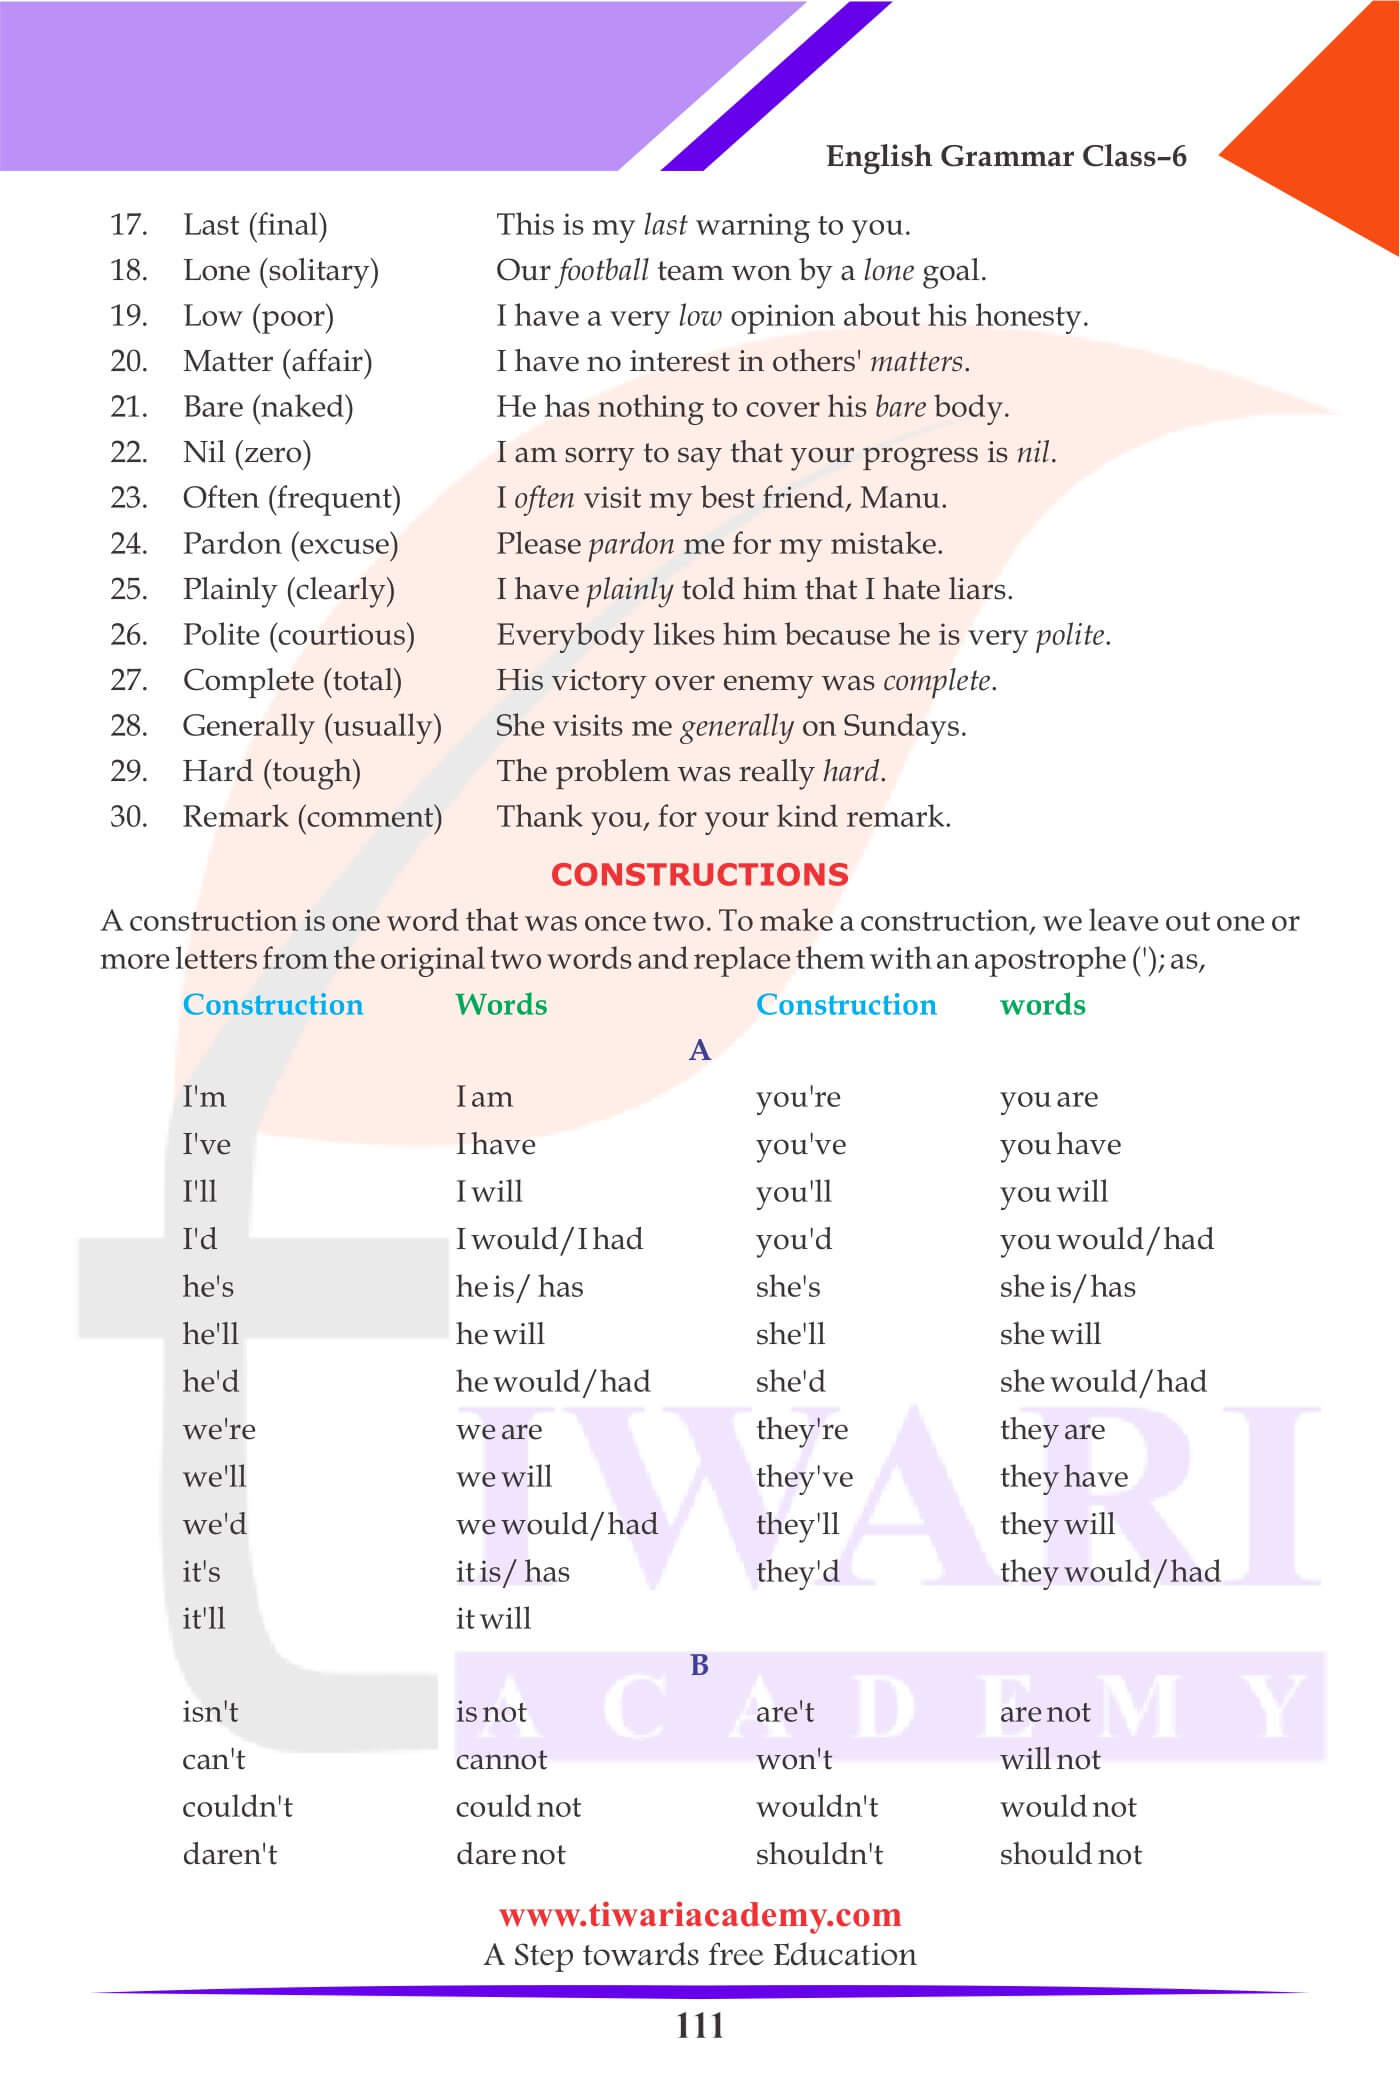 Class 6 English Grammar Vocabulary and Word Power notes